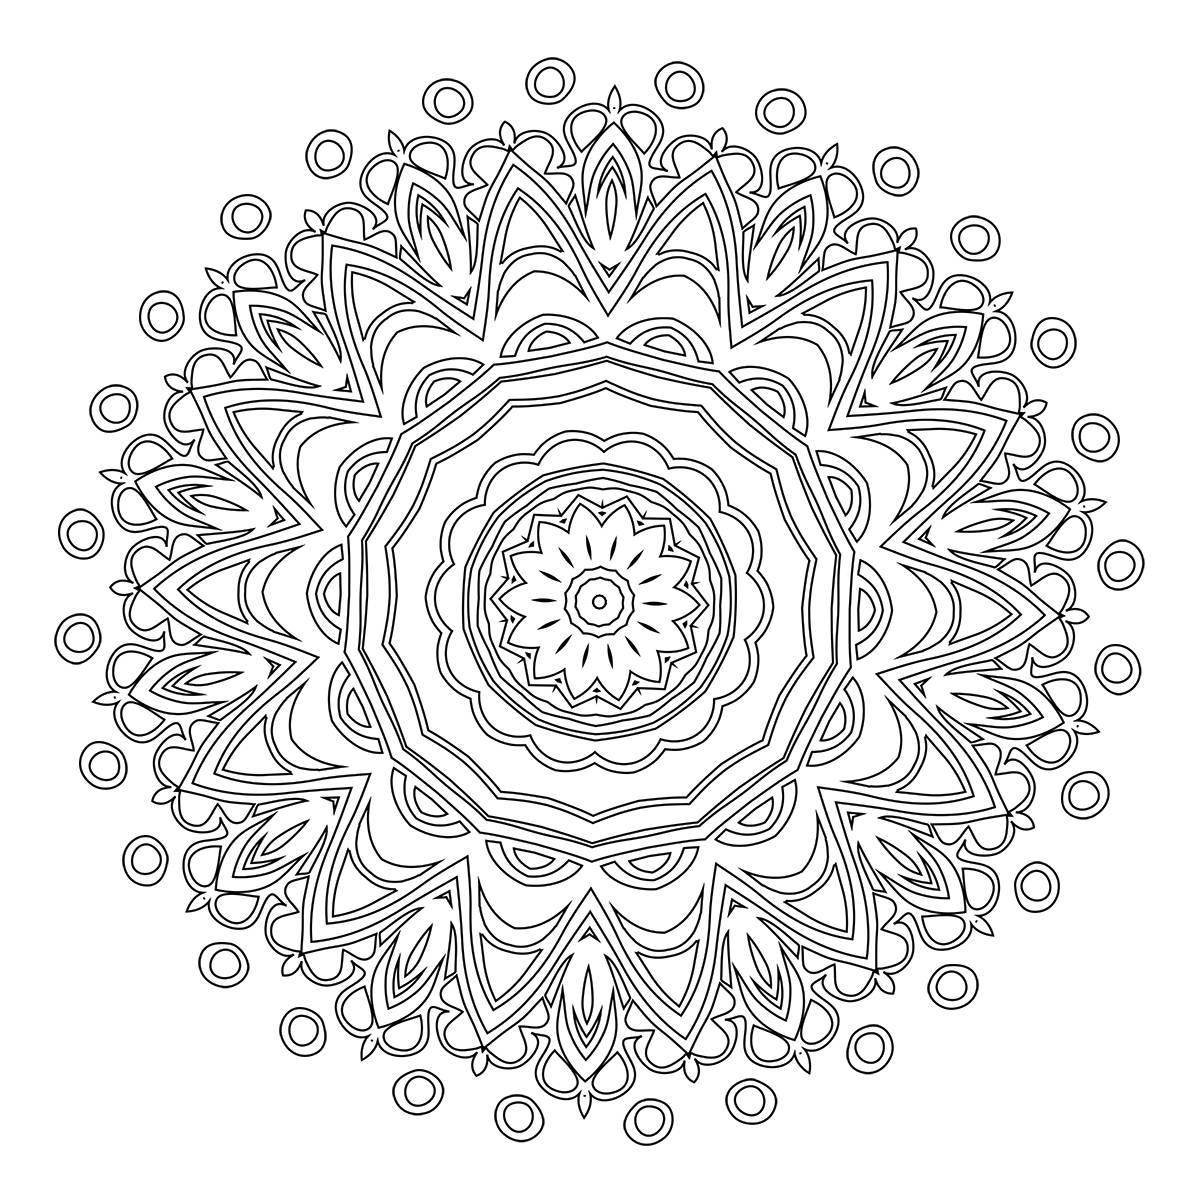 A fun coloring book for meditation and relaxation